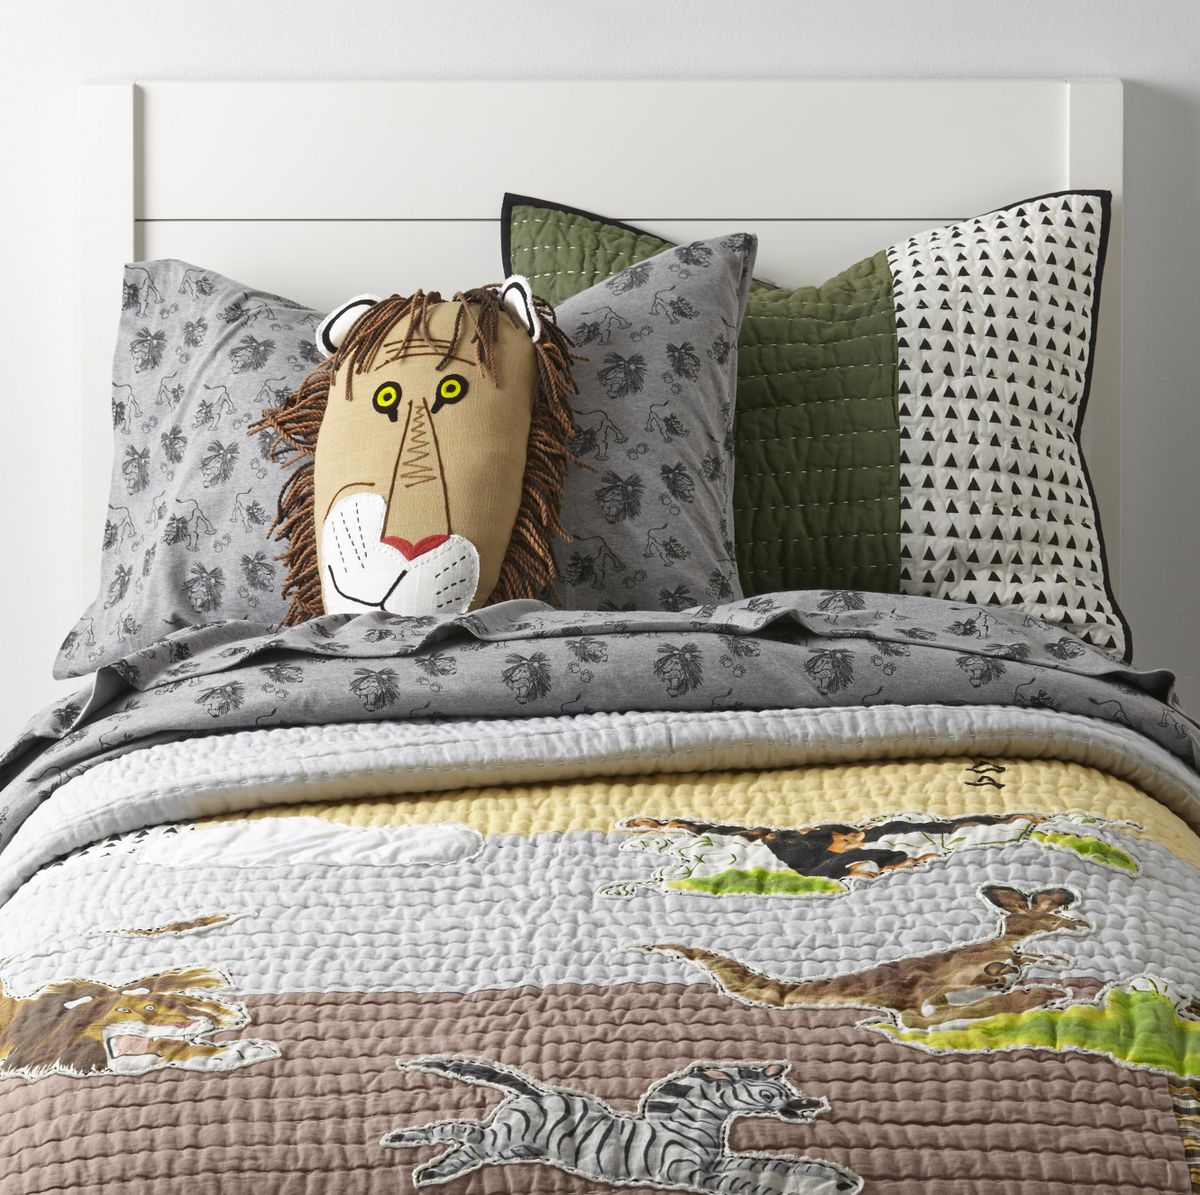 Land of Nod has partnered with Little Golden Books on a reintroduction of several of the publisher’s most iconic children’s books, including this bedding featuring Tawny Scrawny Lion. (Associated Press)